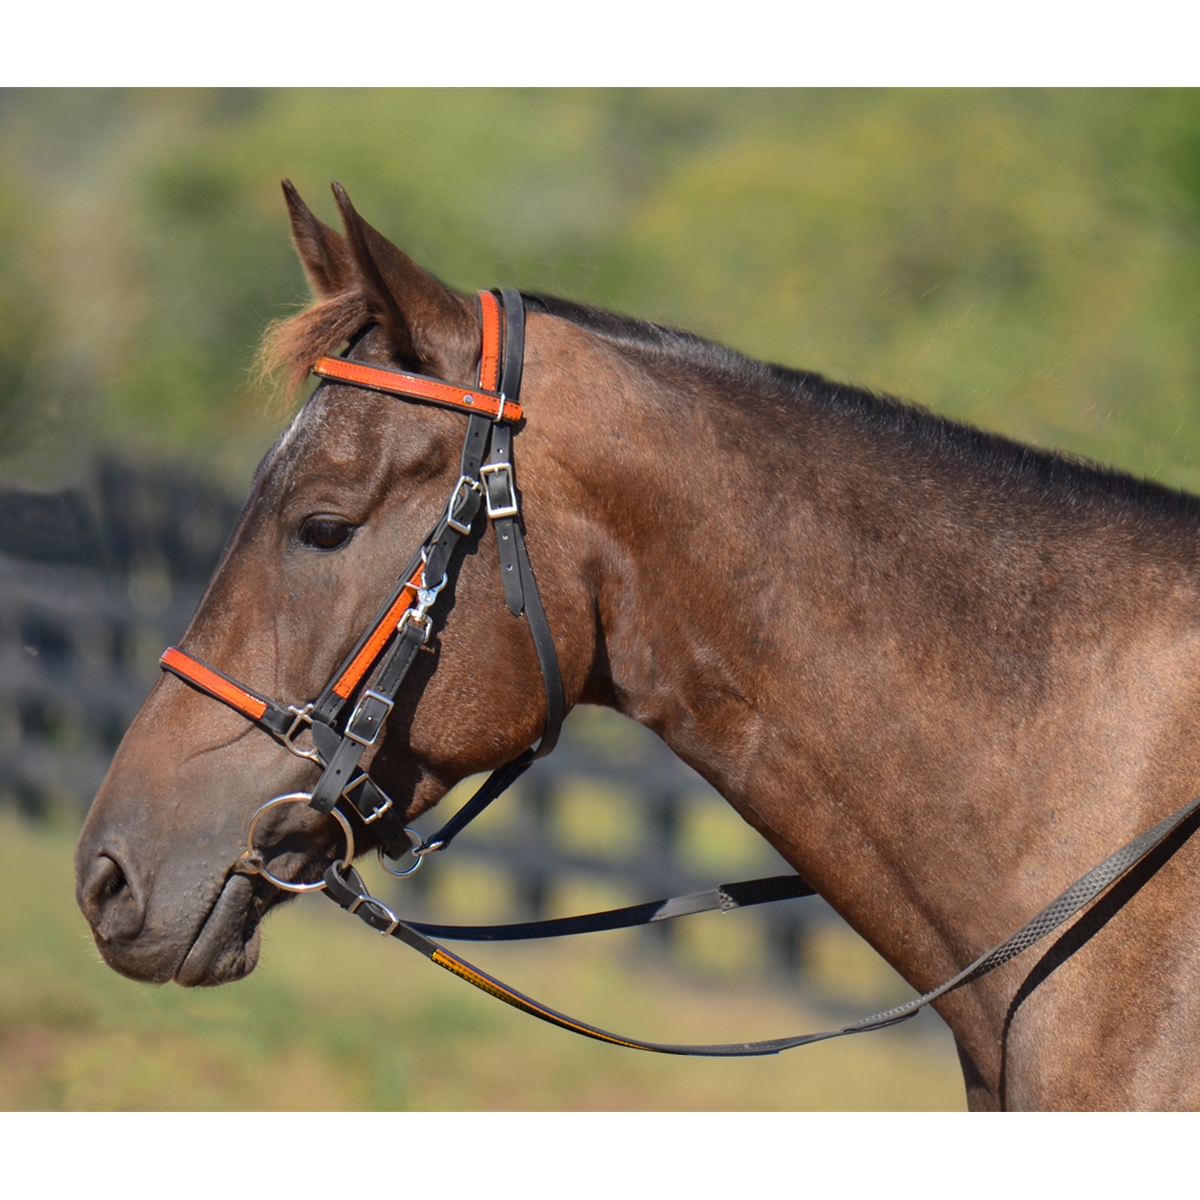 Shop Traditional Halter Bridle with Bit Hangers